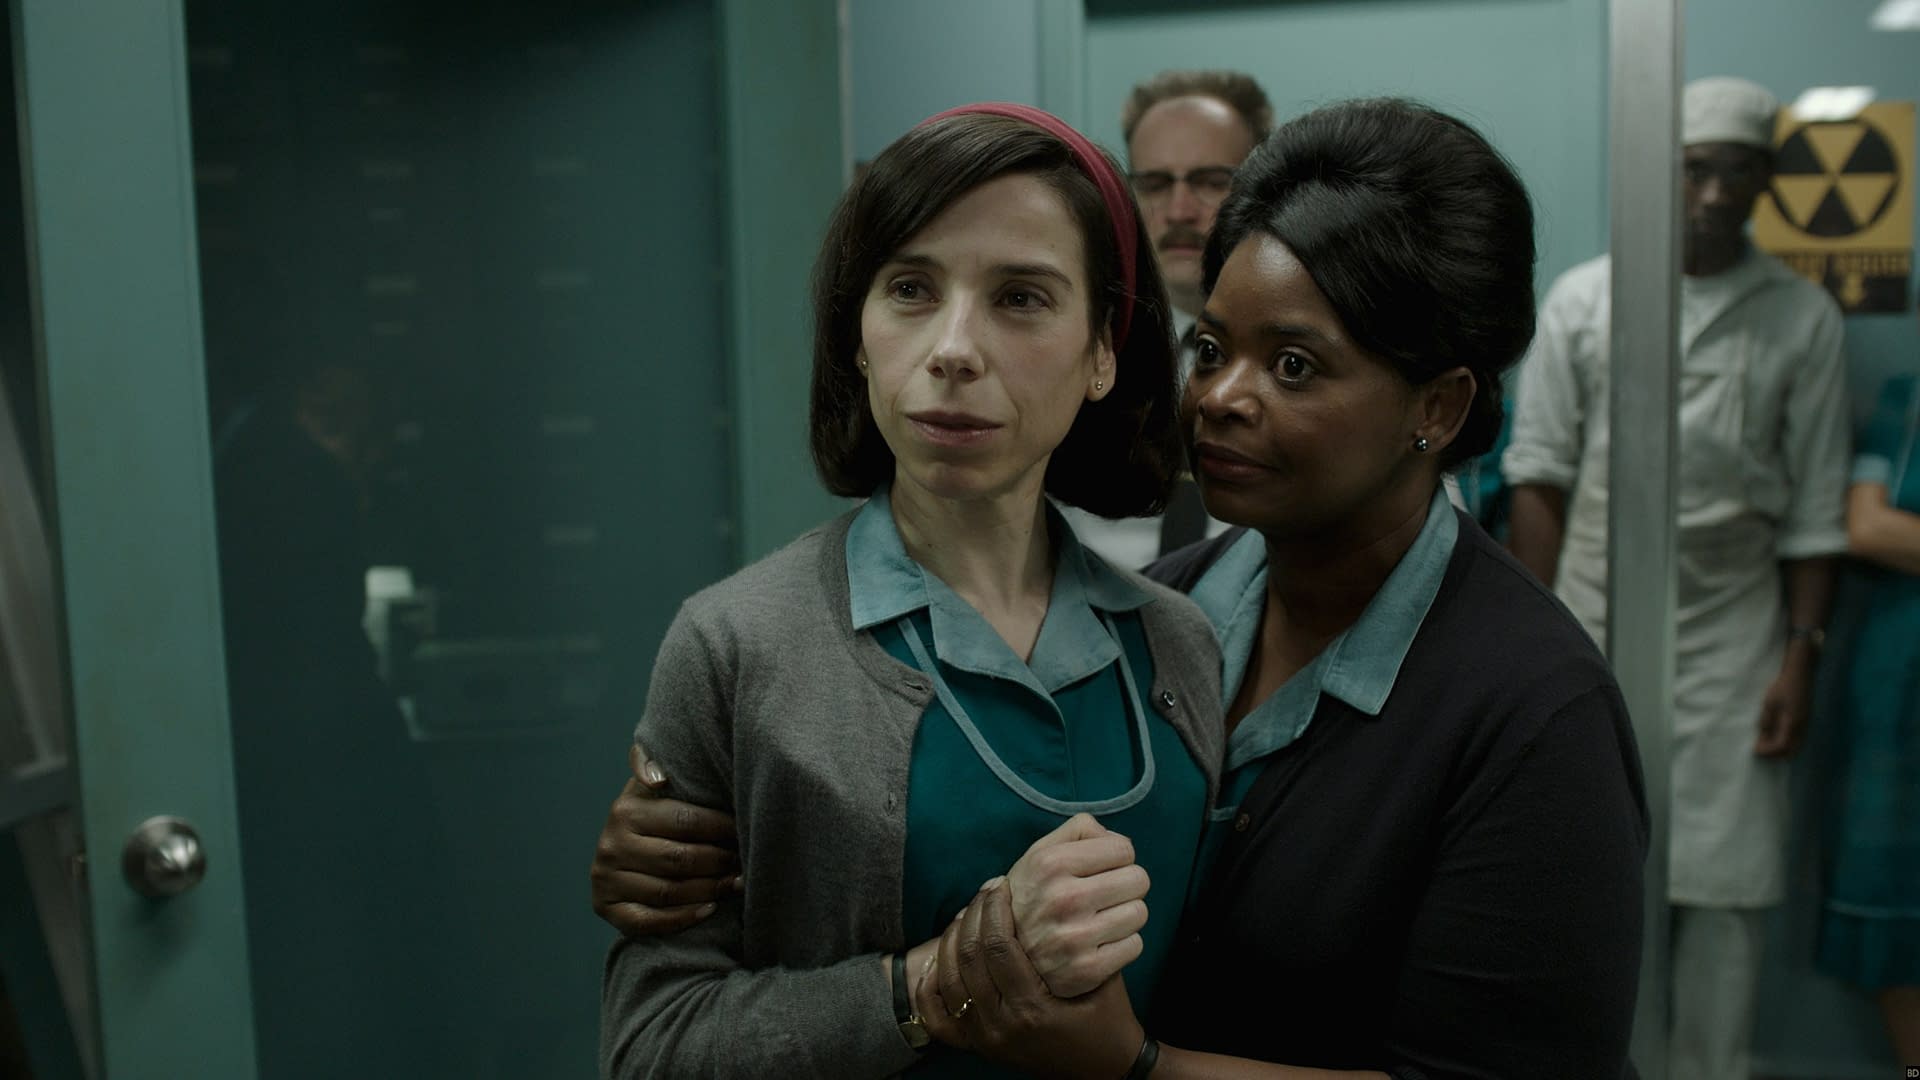 4 New HQ Images From Guillermo Del Toro's 'The Shape Of Water'